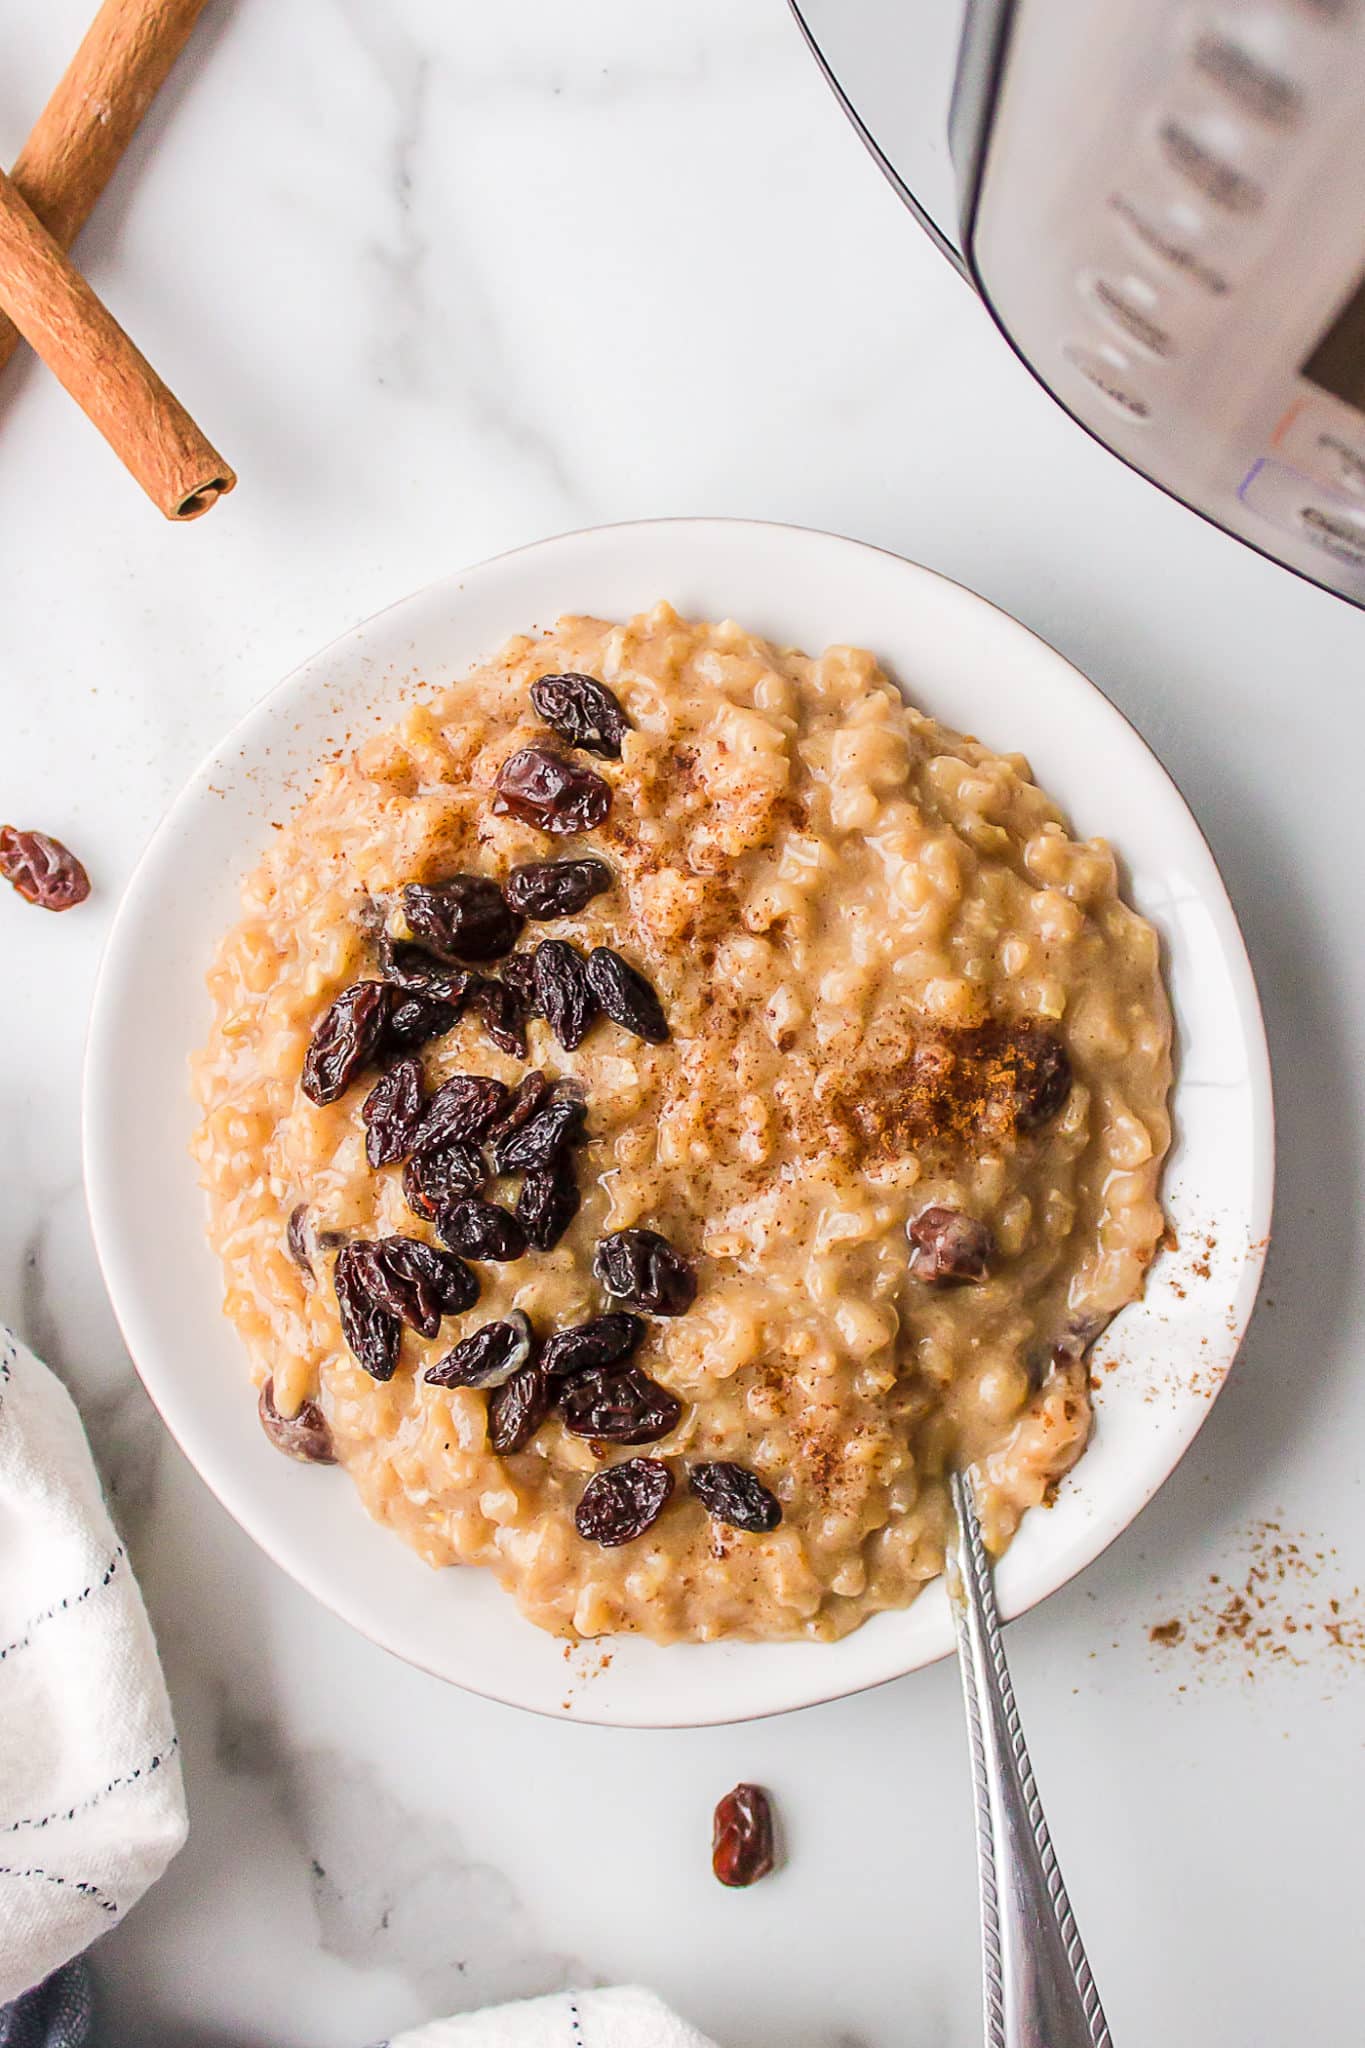 instant pot brown rice pudding in a white bowl.